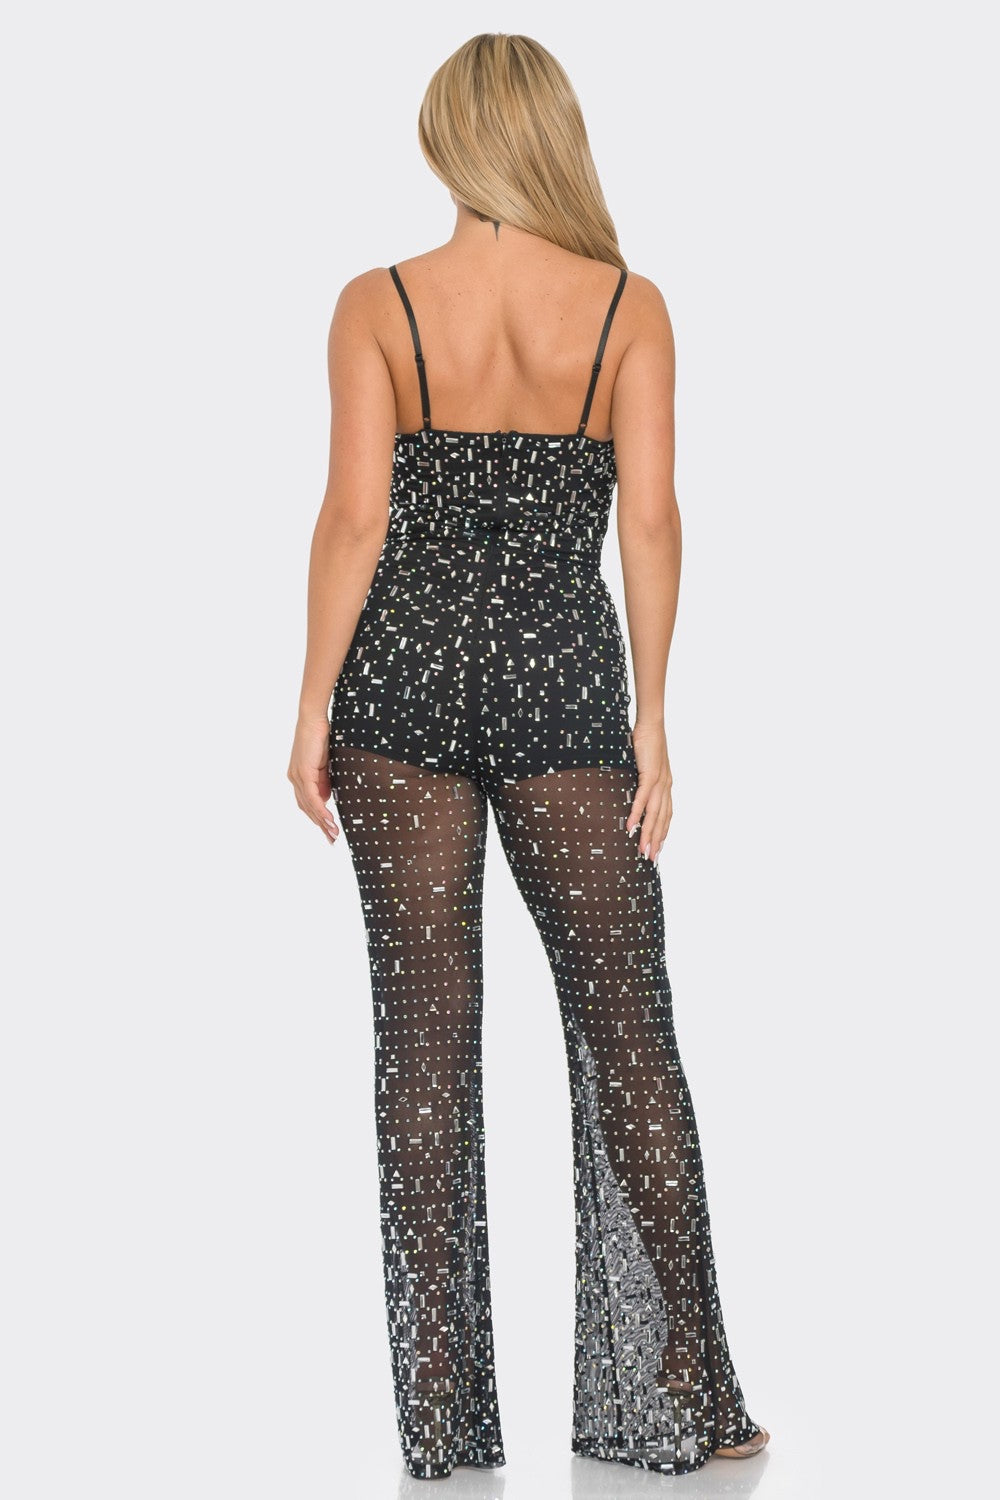 Chic and Fun Girl Jumpsuit